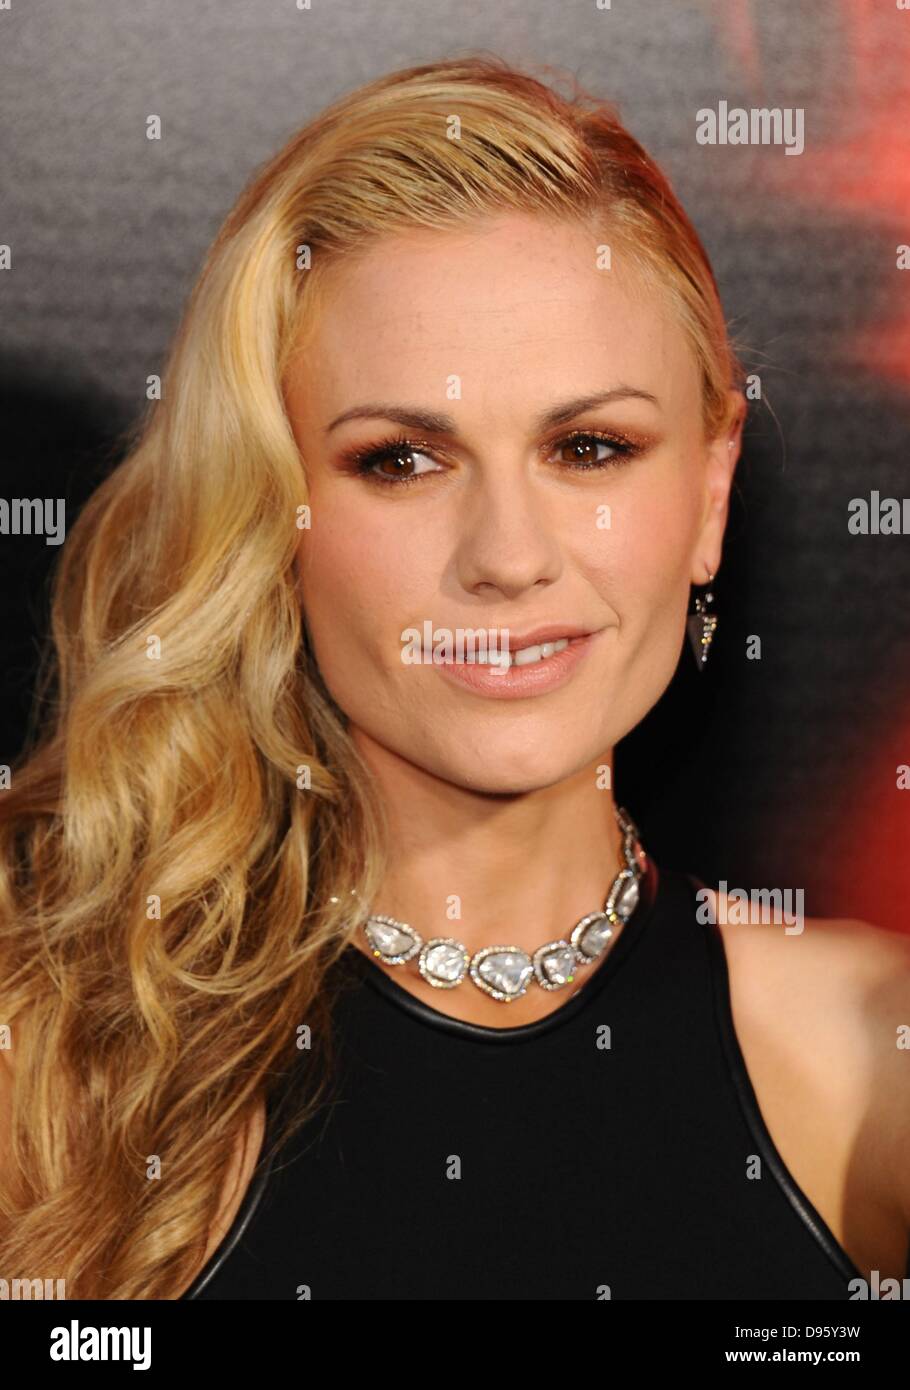 Los Angeles, CA. 11th June, 2013. Anna Paquin at arrivals for TRUE BLOOD Season Premiere, Cinerama Dome at The Arclight Hollywood, Los Angeles, CA June 11, 2013. Credit: Dee Cercone/Everett Collection/Alamy Live News Stock Photo